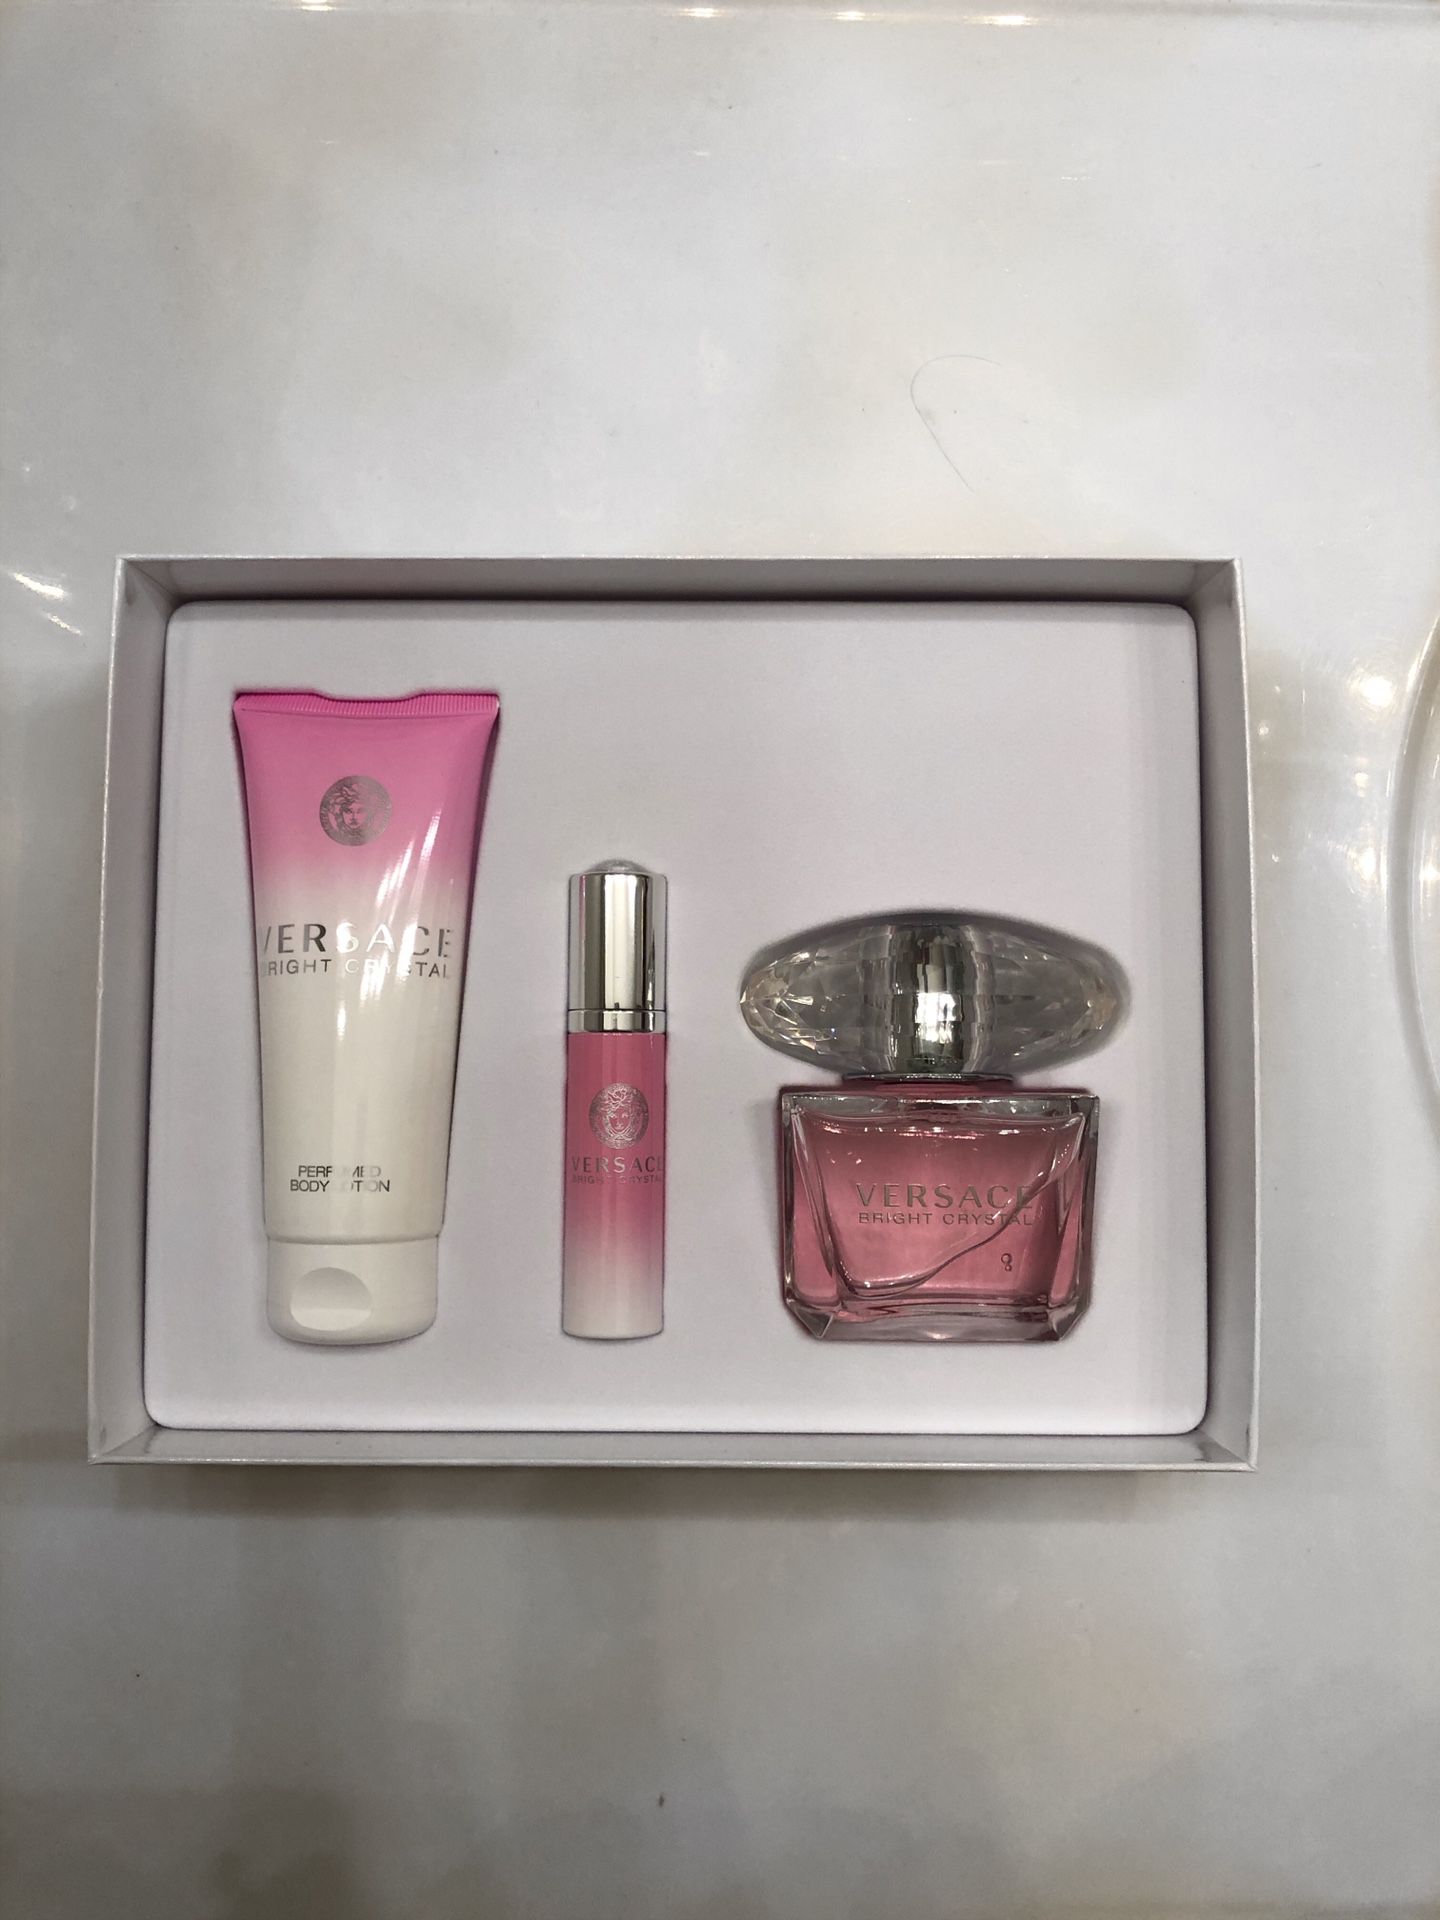 Versace Bright Crystal Gift Set - PERFECT VALENTINE’S DAY GIFT